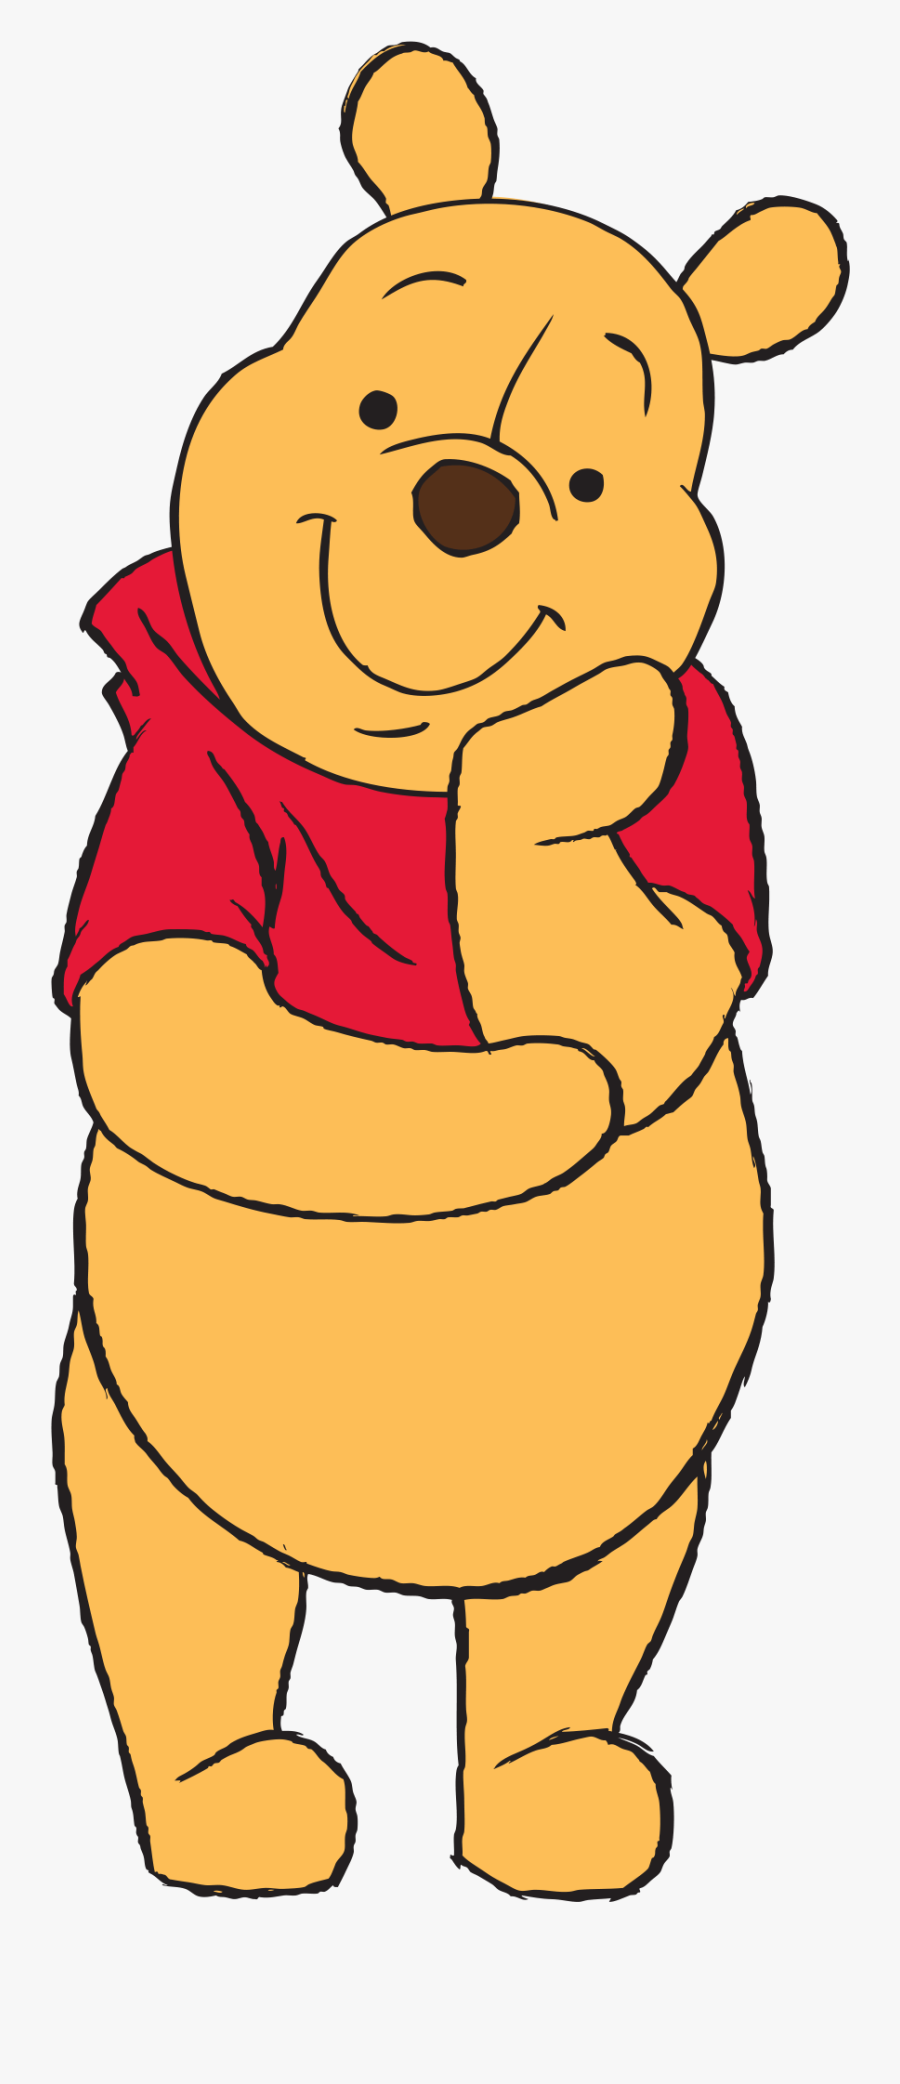 Pin By Hopeless On - Disney Characters Winnie The Pooh, Transparent Clipart